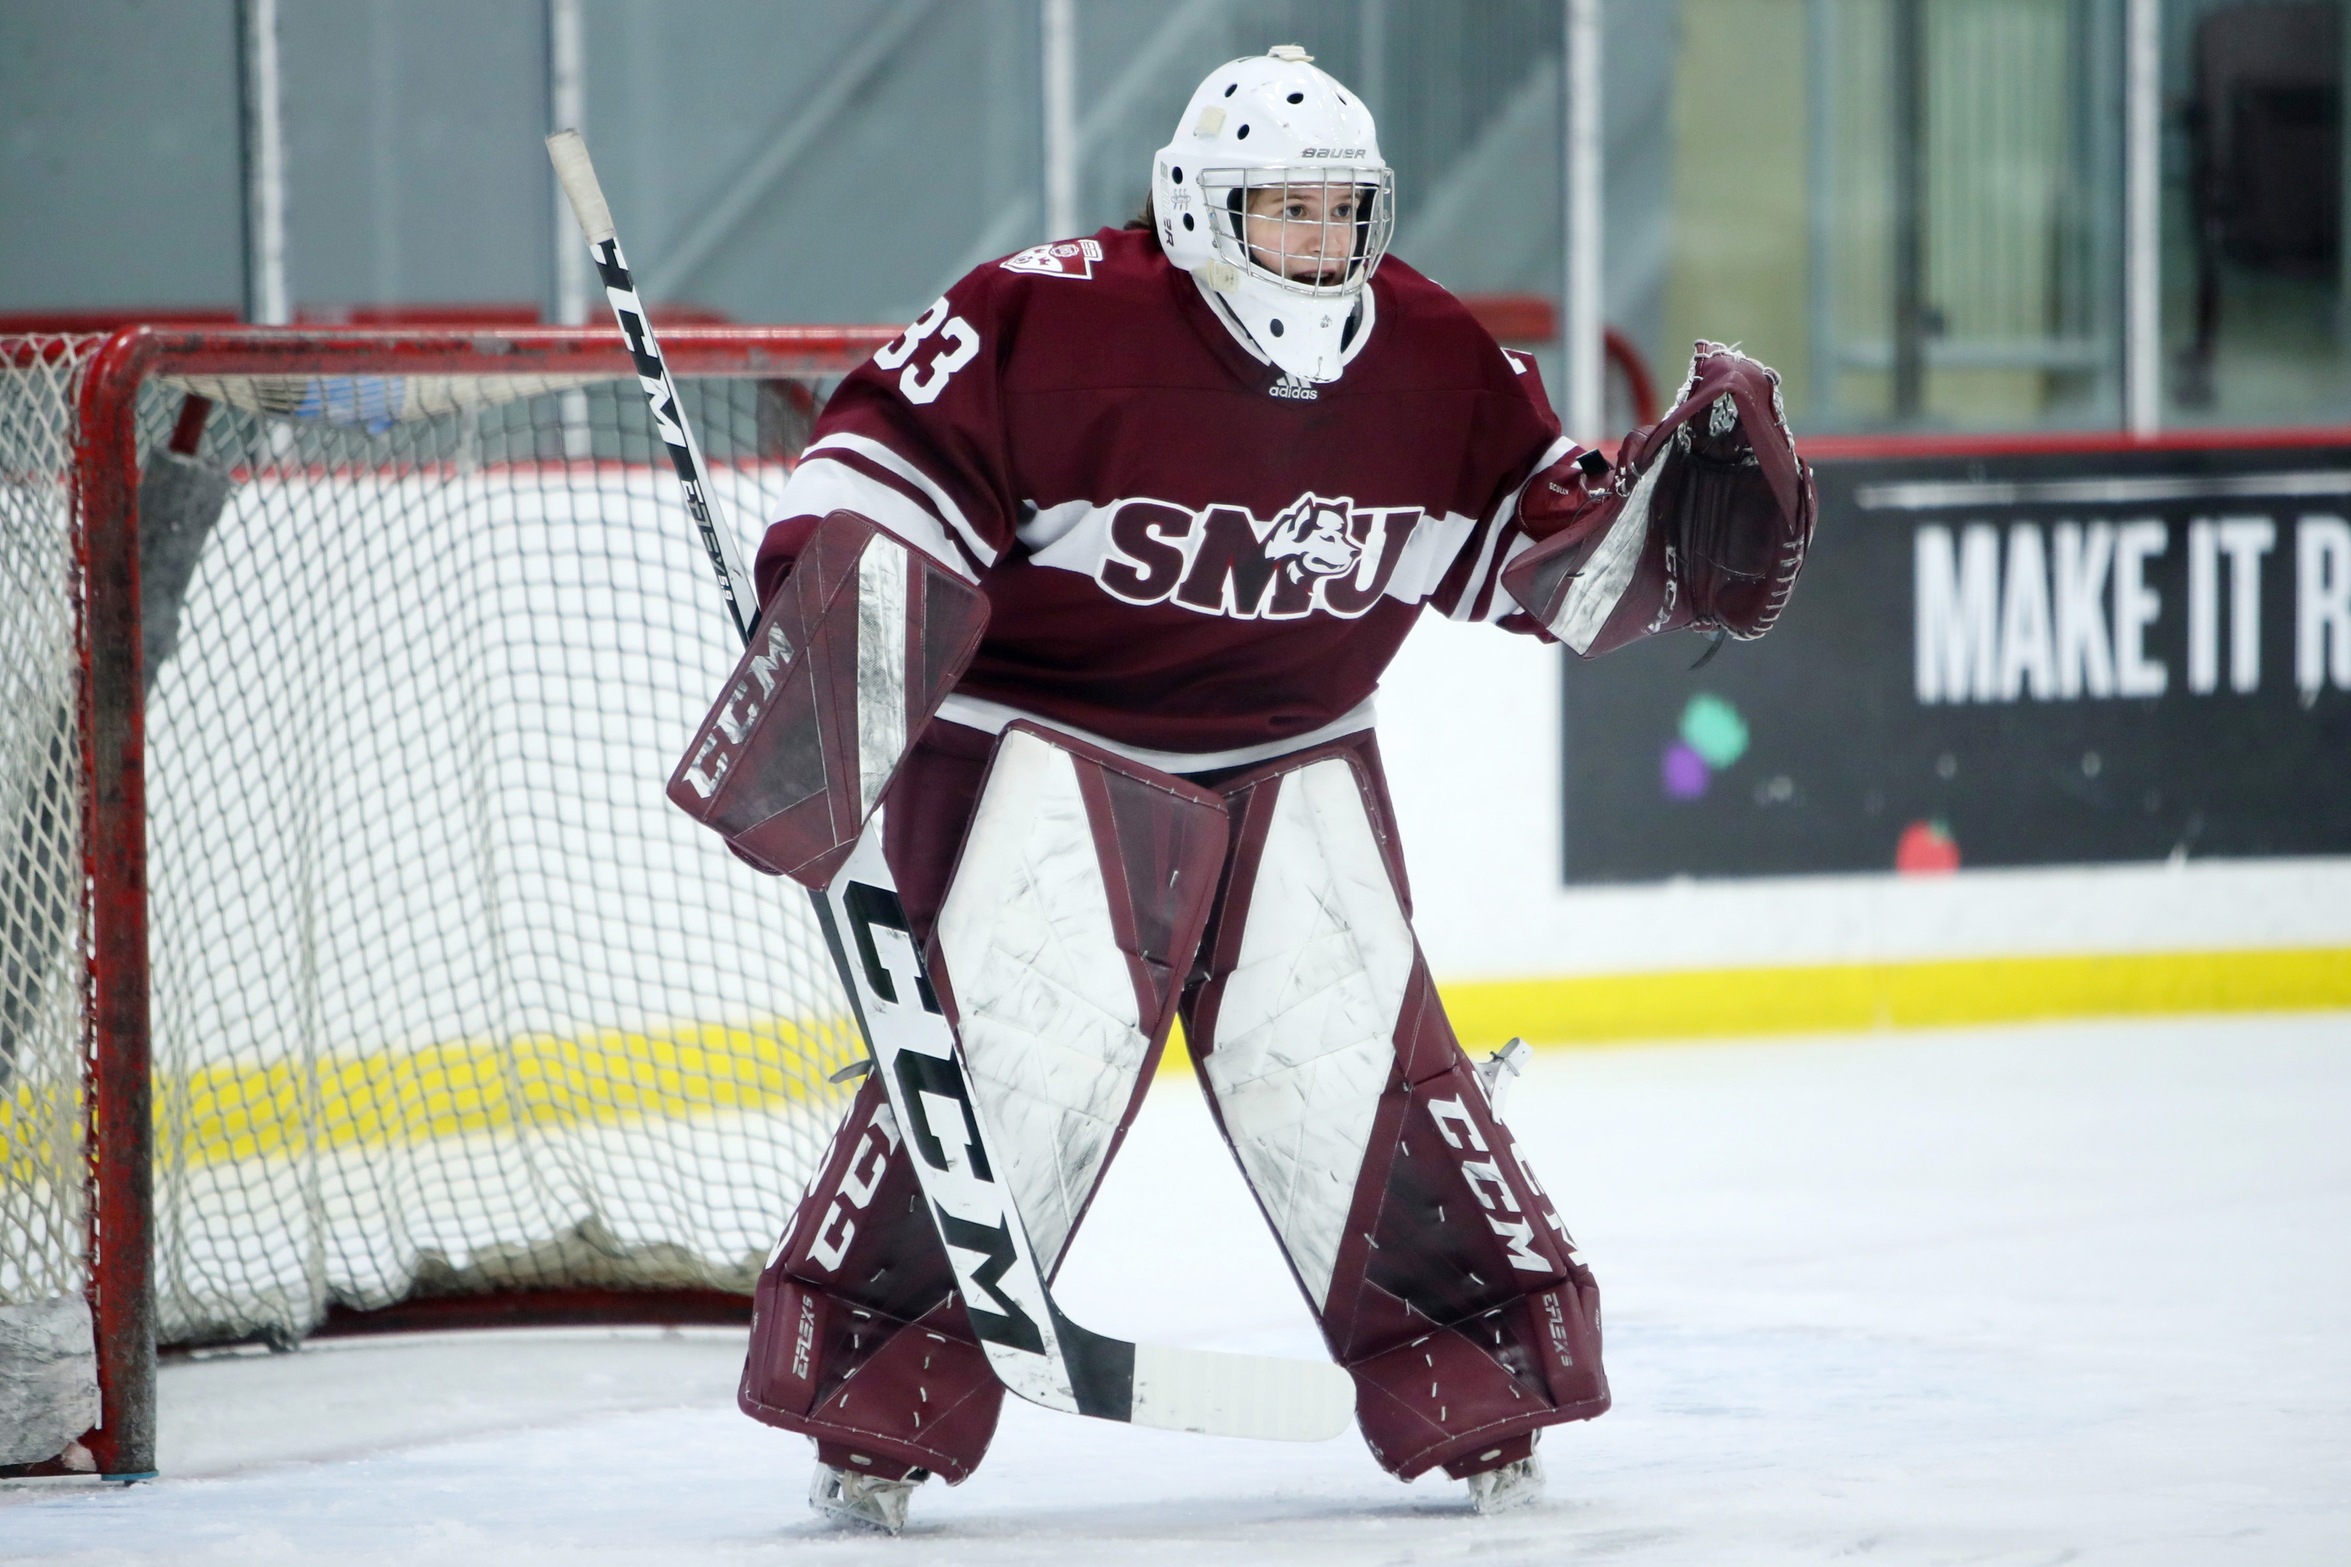 Scully records first AUS shutout as Huskies defeat Aigles Bleues 5-0